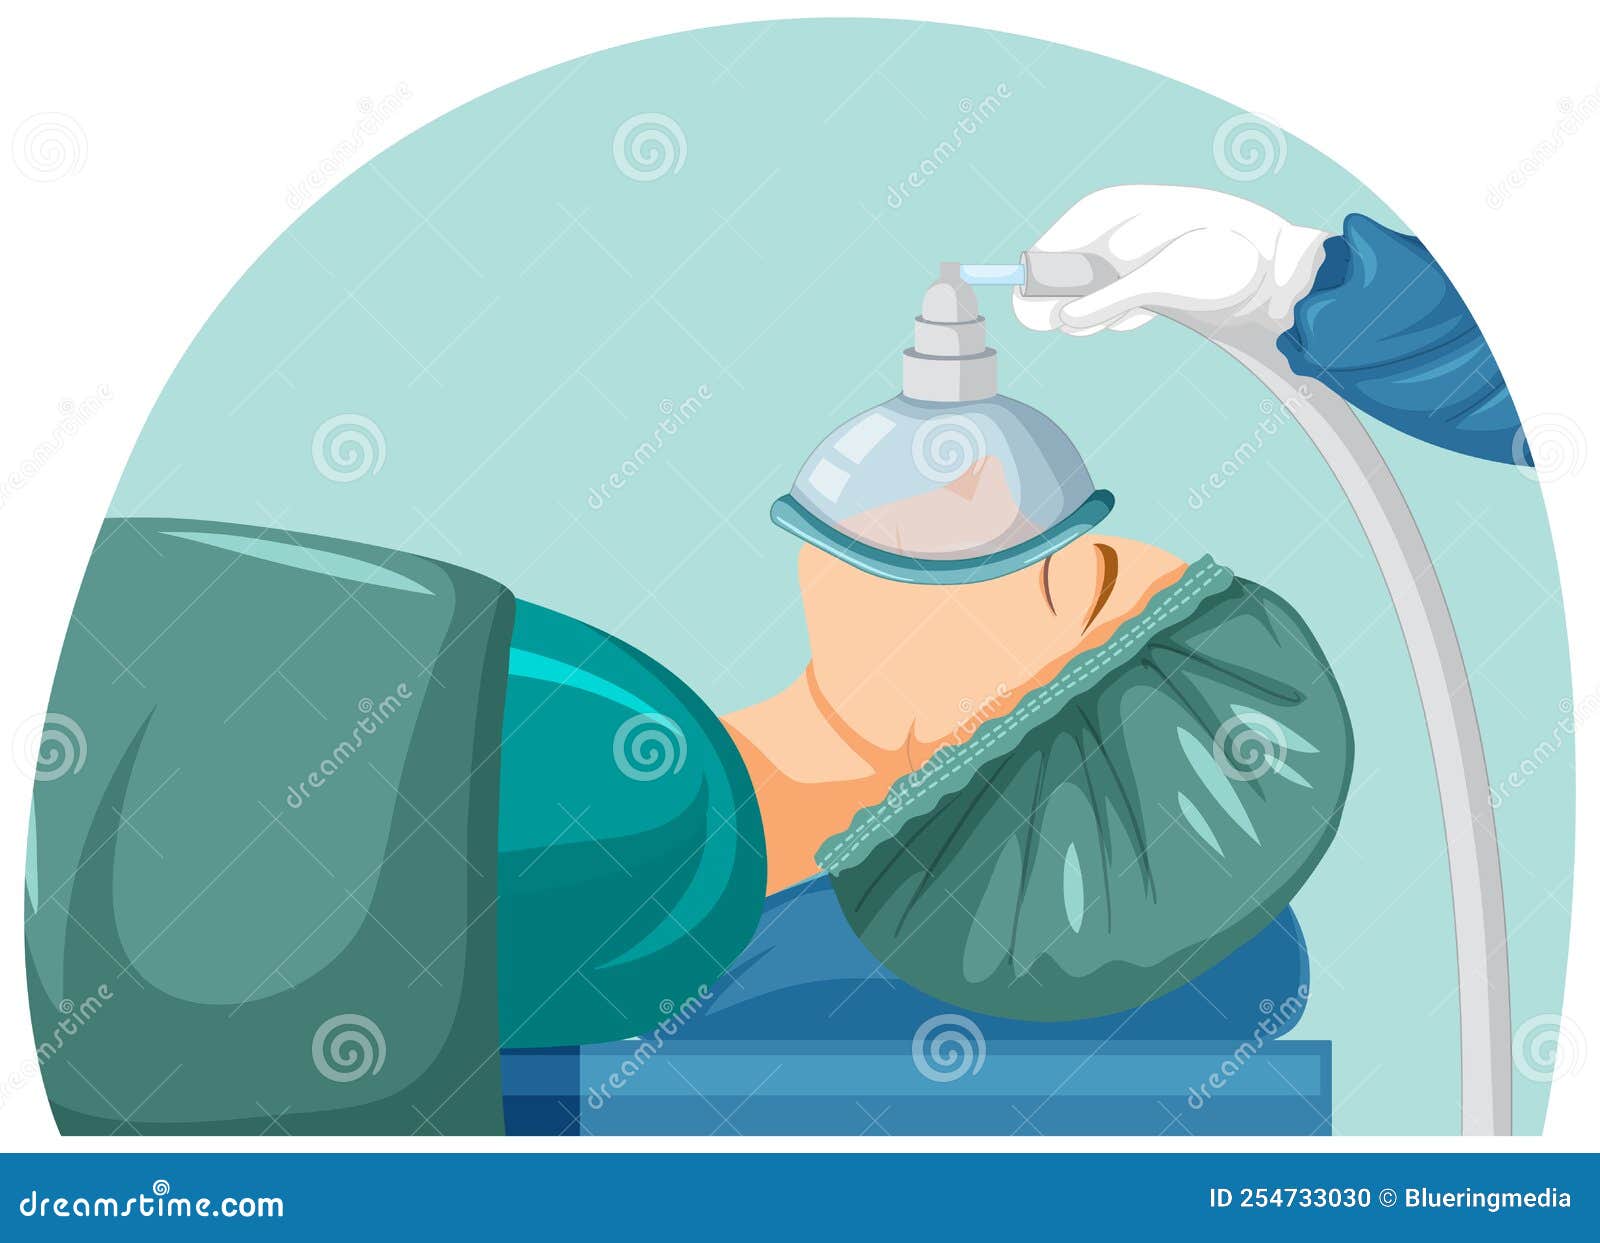 Patient with anesthesia mask illustration